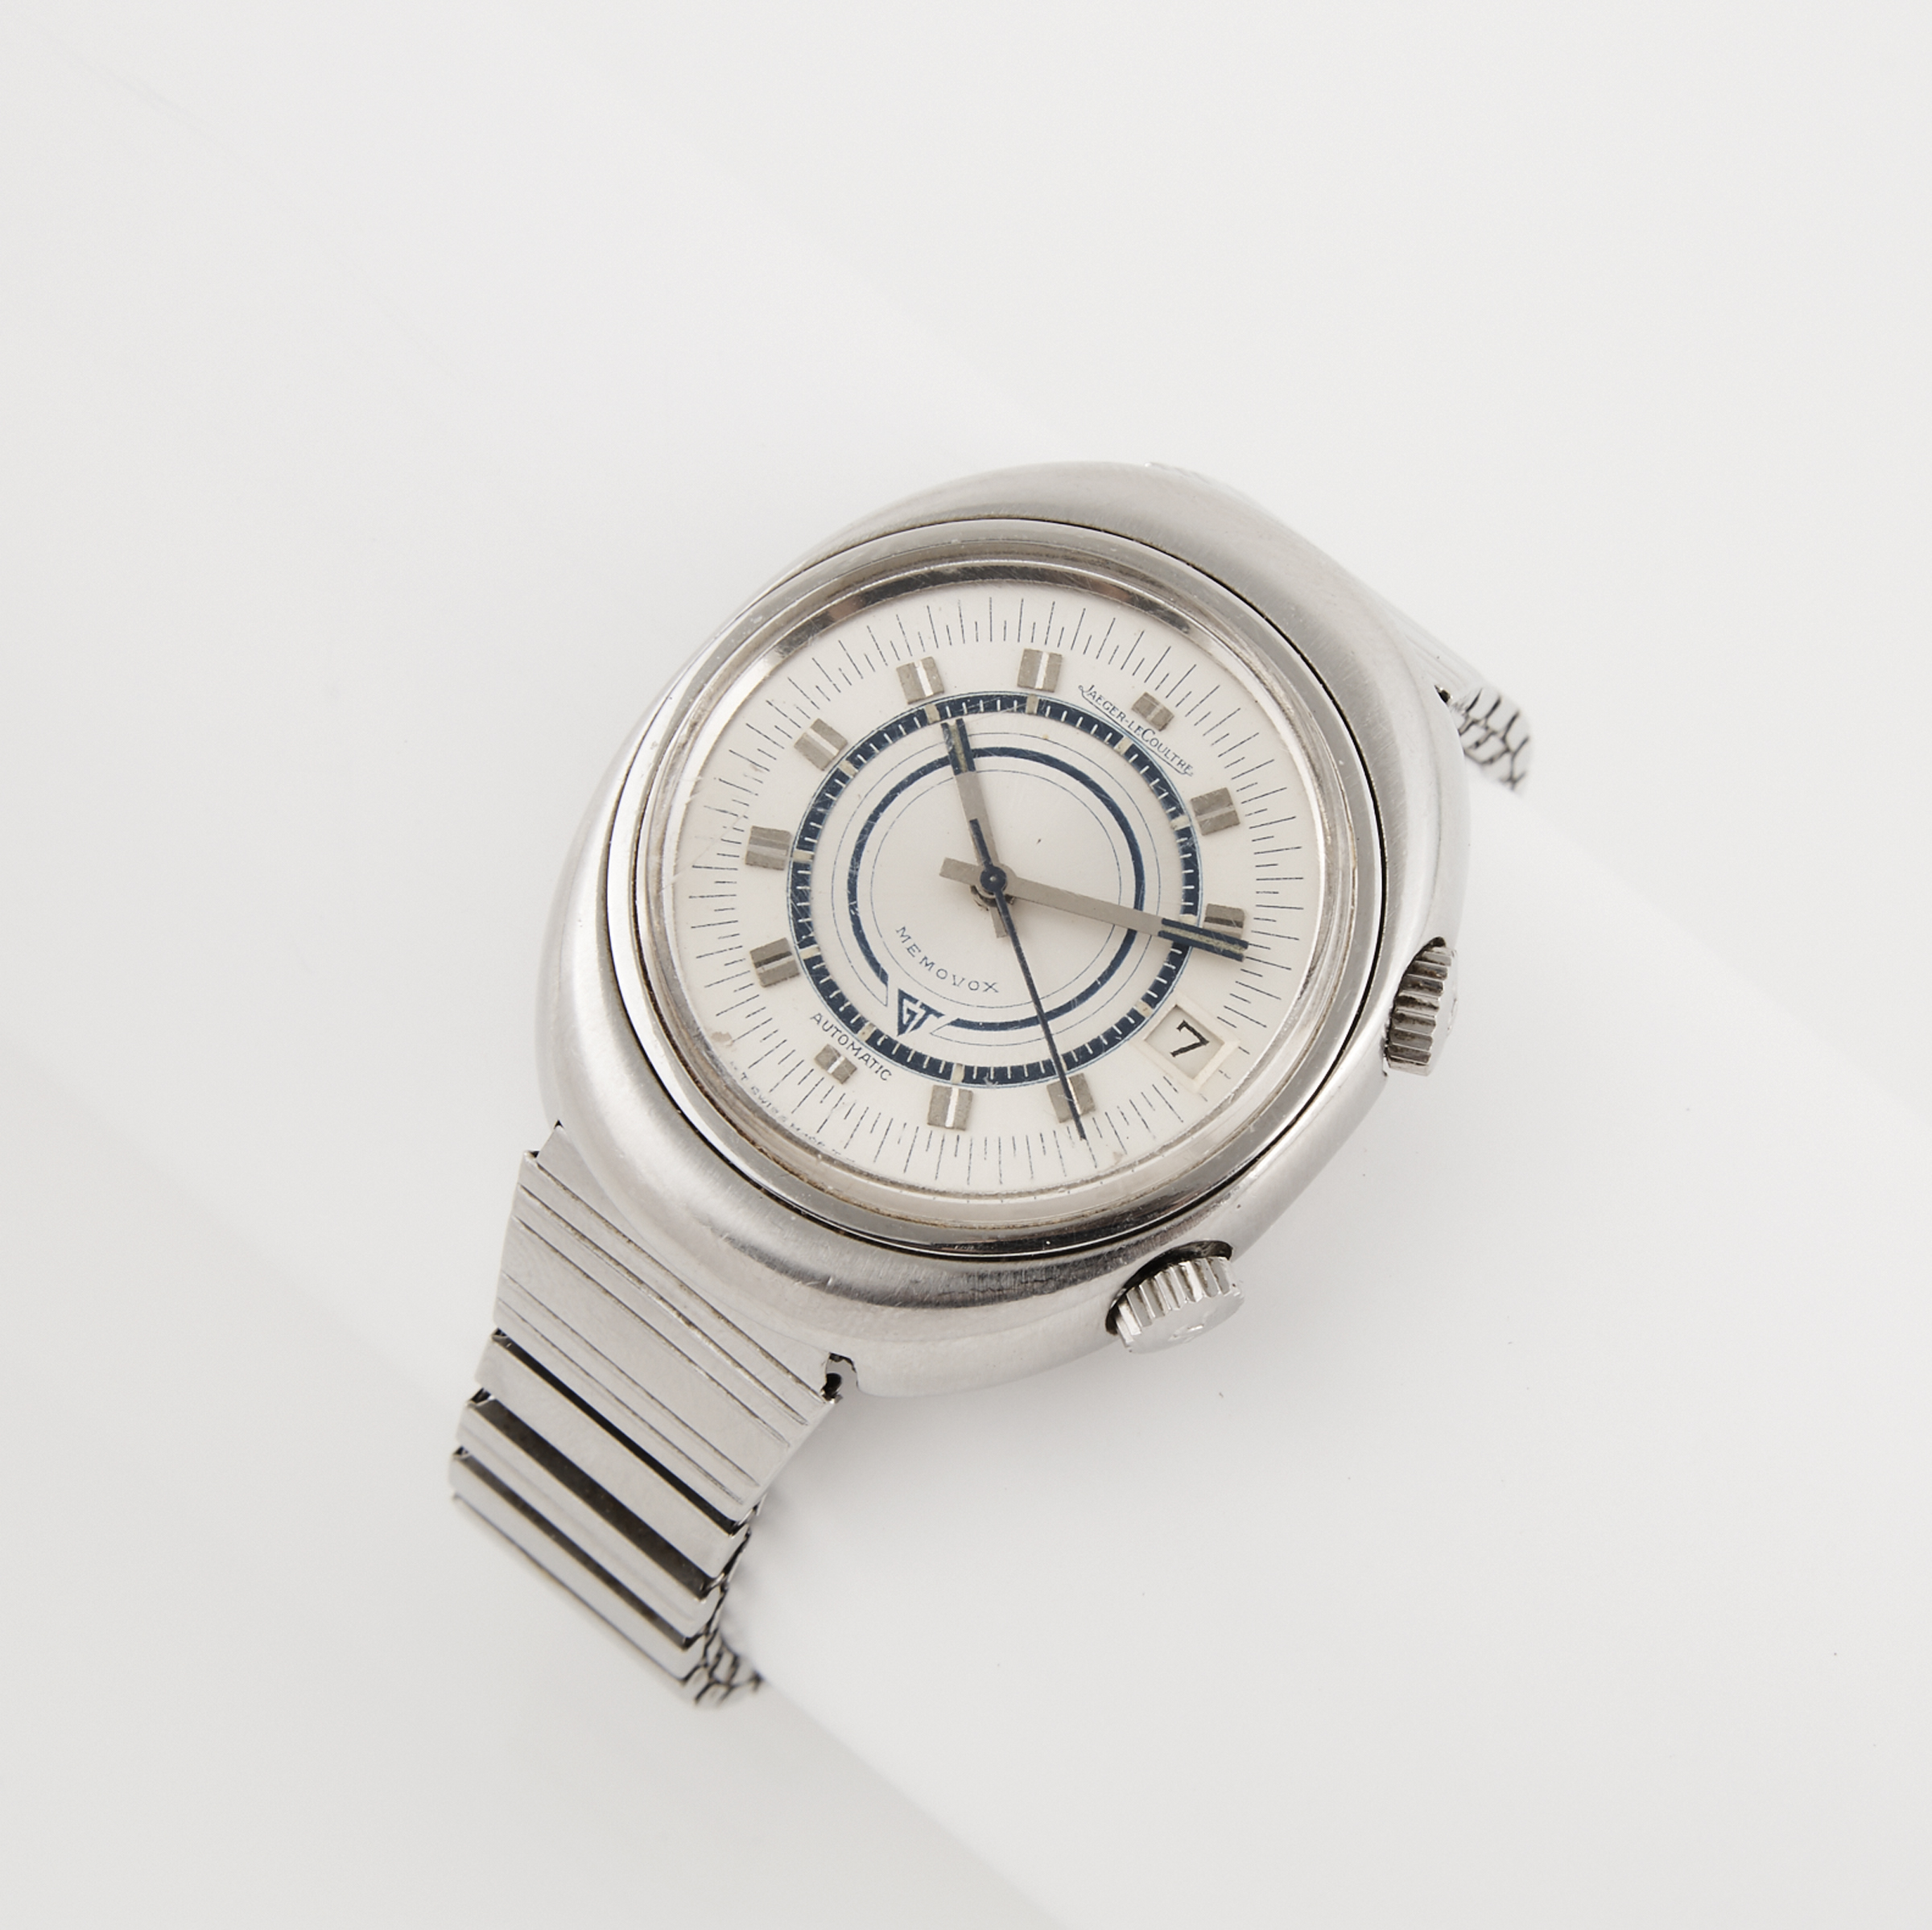 Jaeger-LeCoultre Memovox 'GT' Wristwatch With Date And Alarm